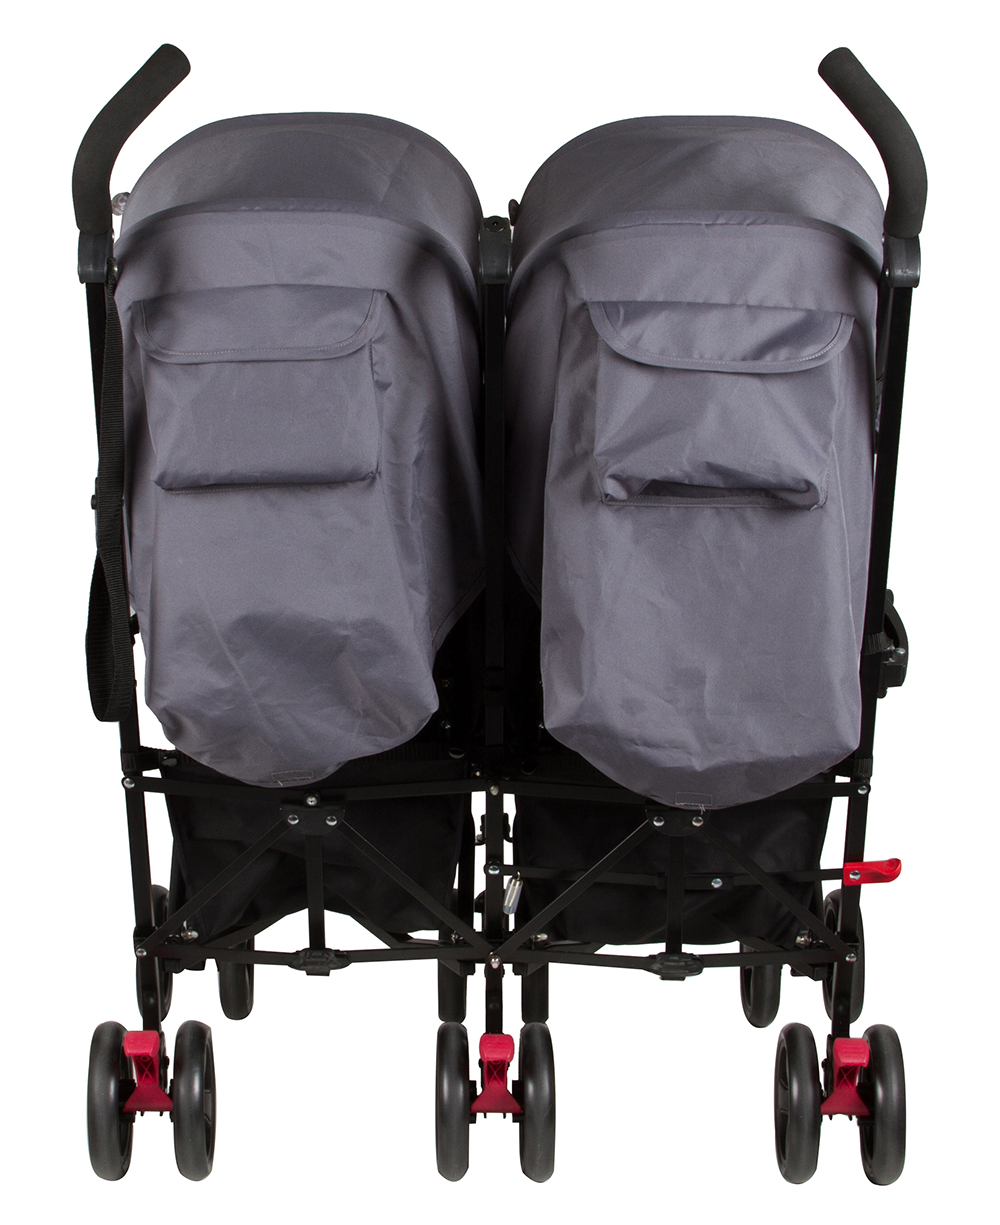 childcare nix stroller review